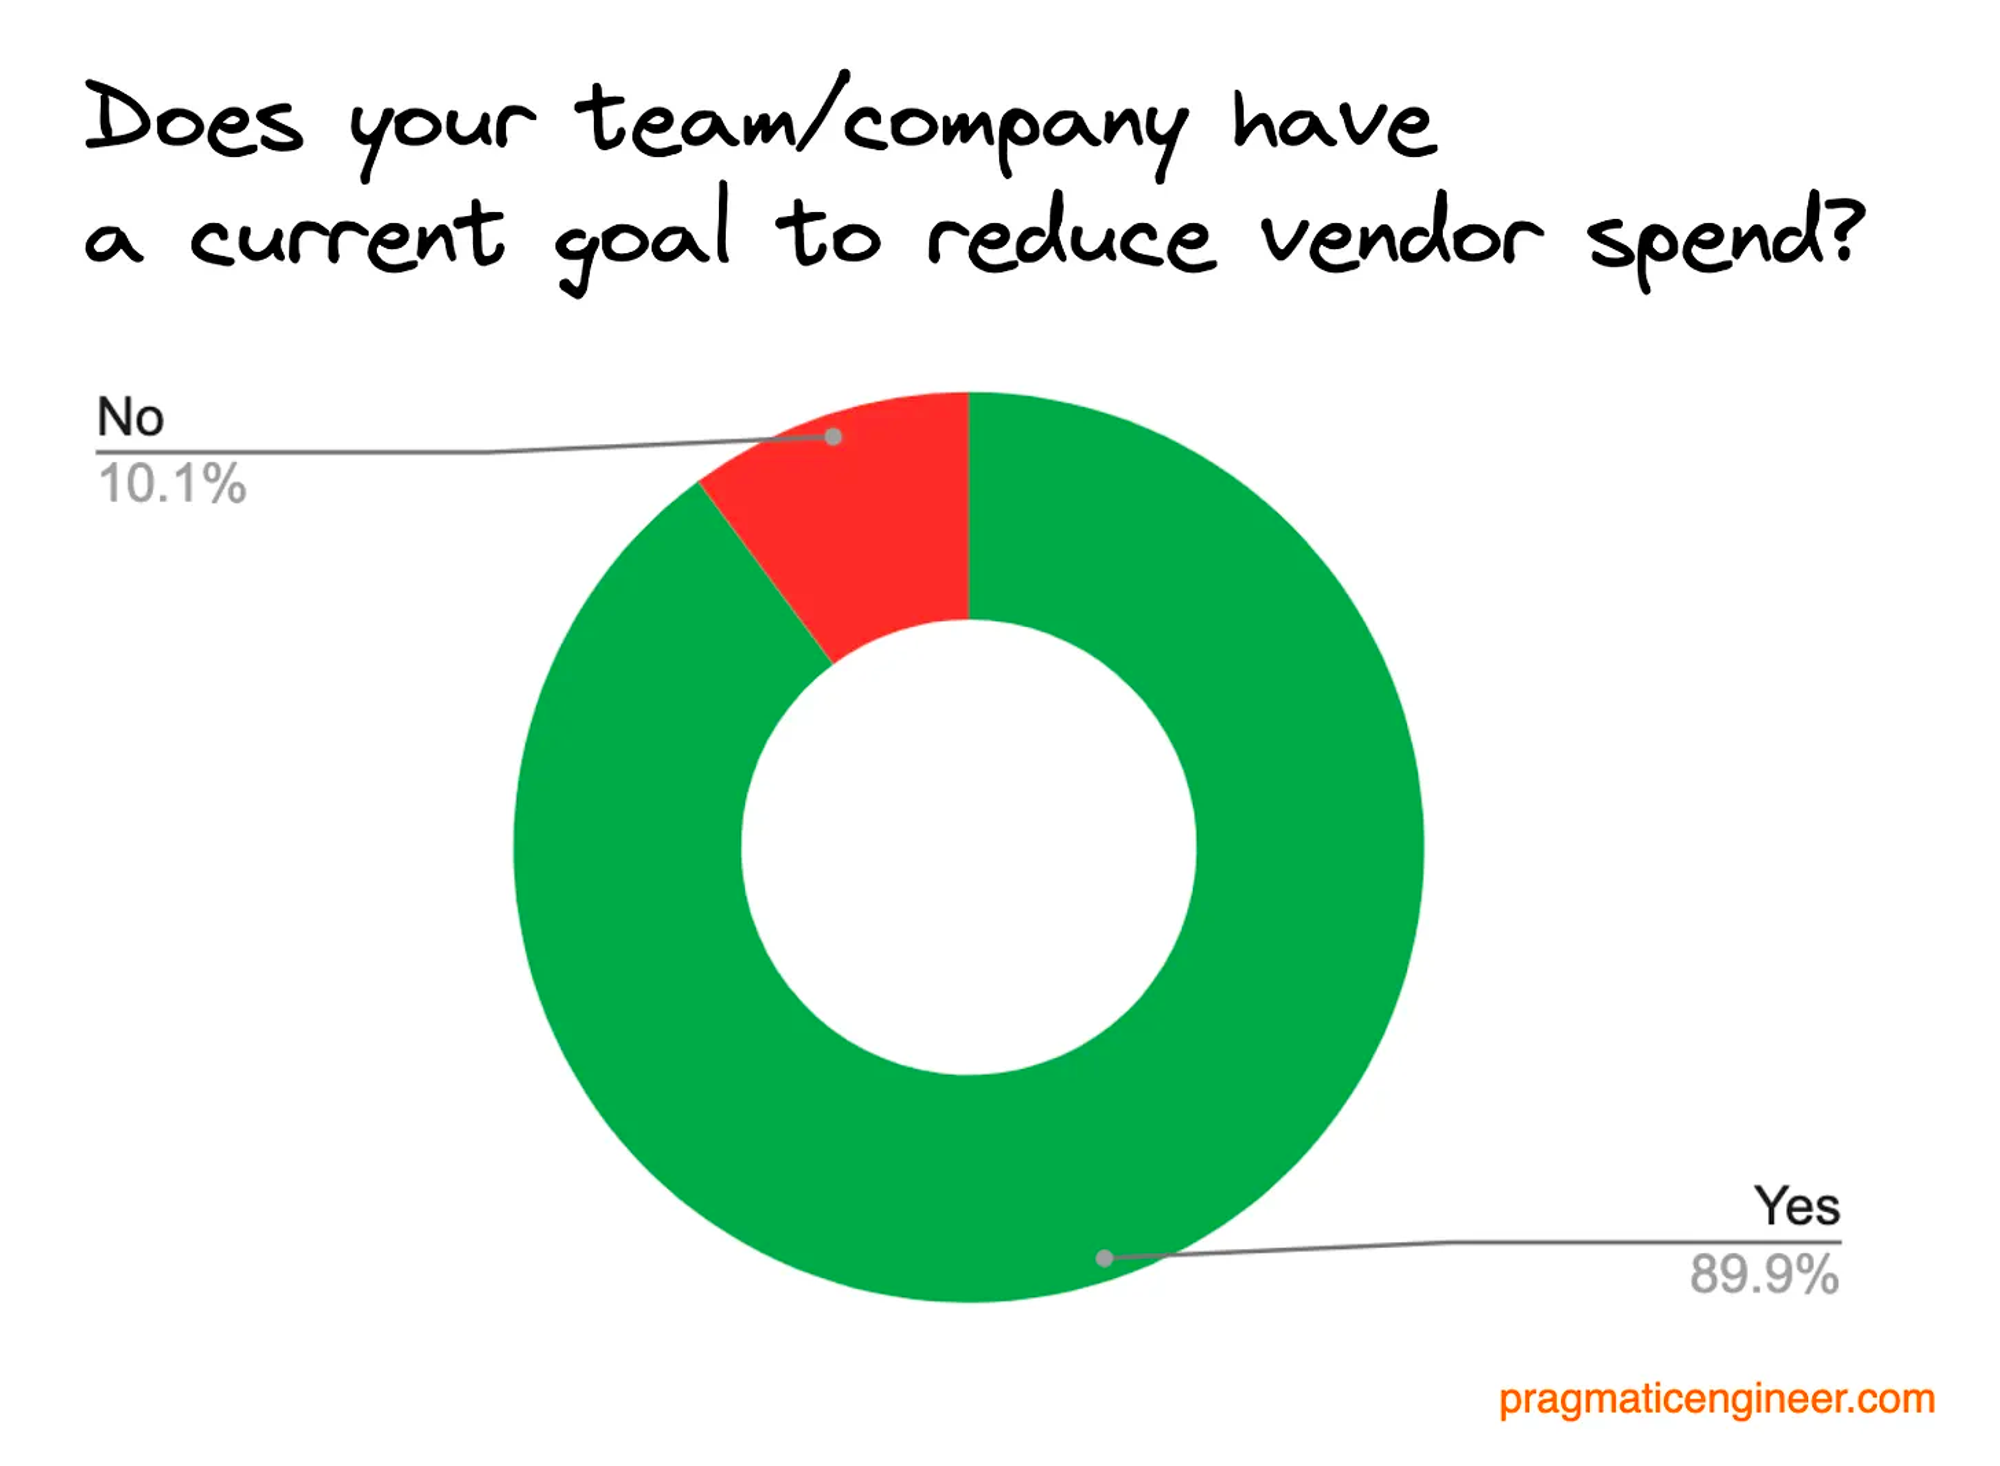 ![&quot;diagram to illustrate a poll showing that nearly 90% of companies now consider it a goal to reduce vendor spend from &lt;a href=&quot;https://pragmaticengineer.com&quot;&gt;pragmaticengineer.com&lt;/a&gt;&quot;]